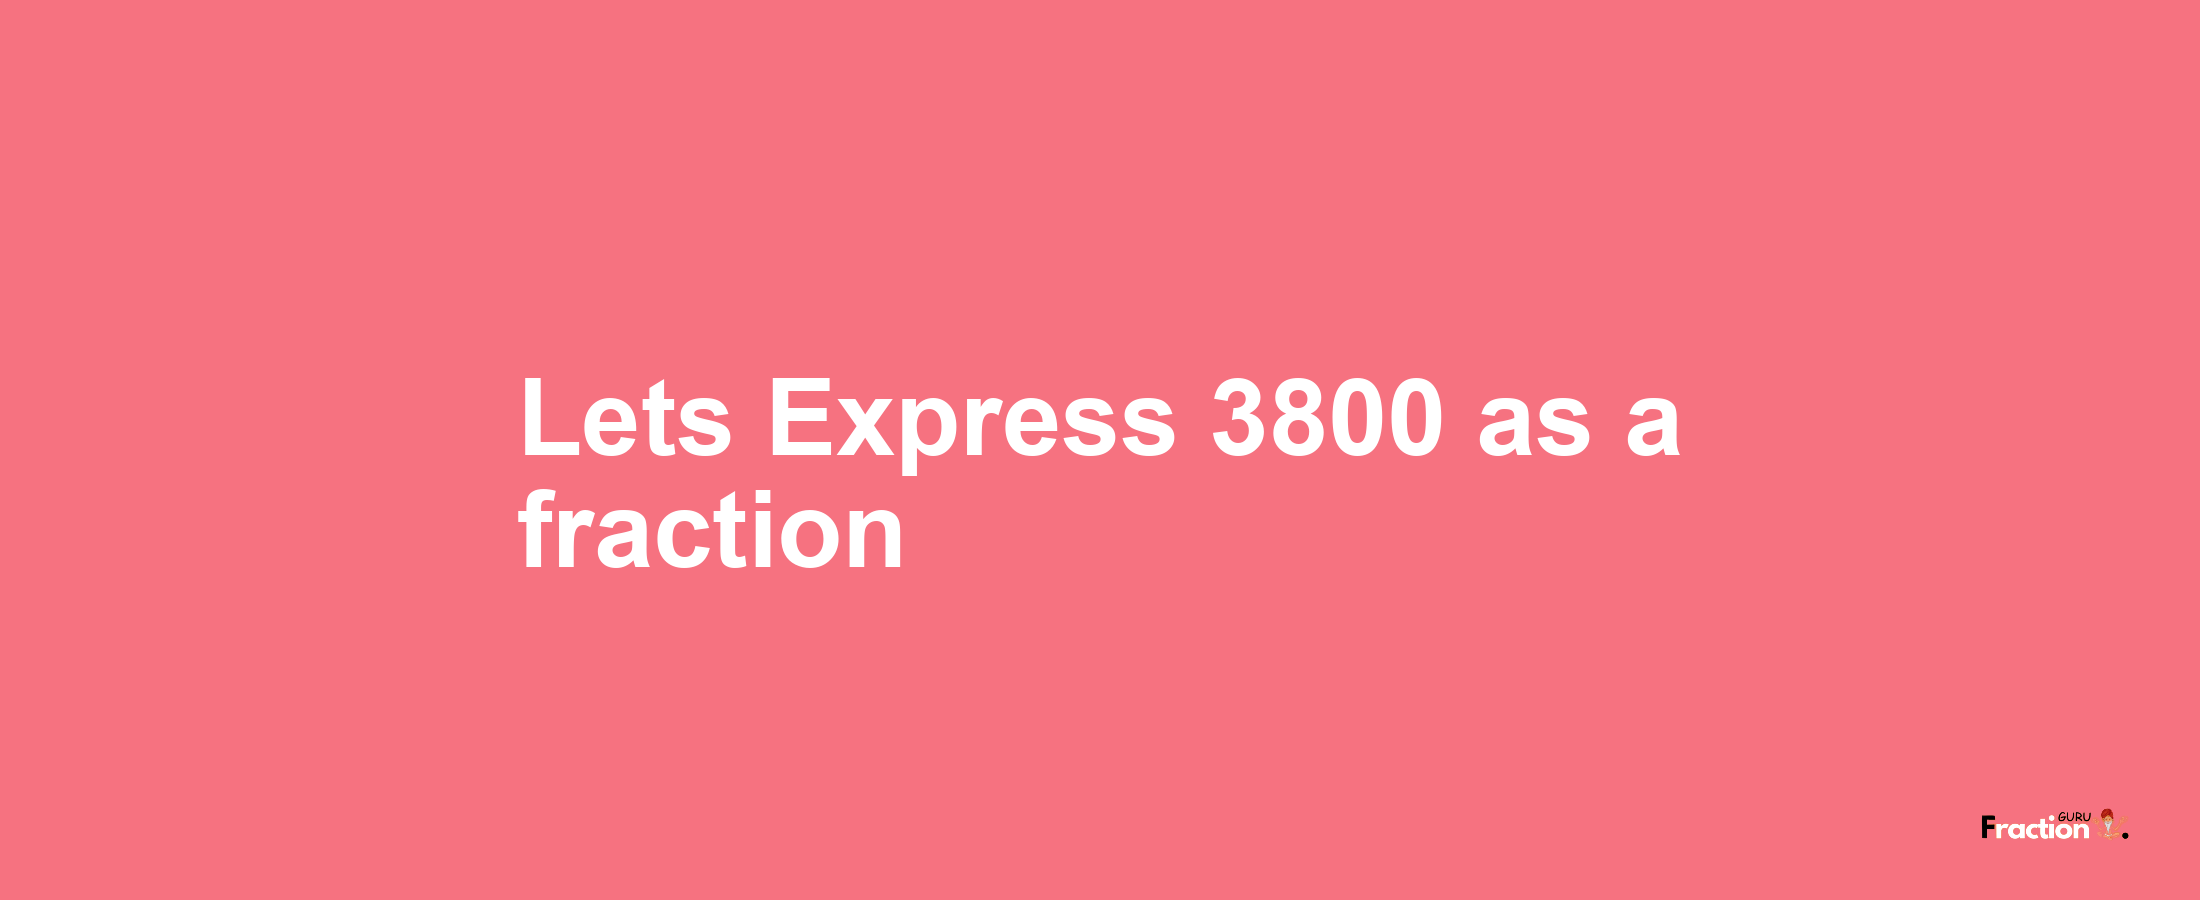 Lets Express 3800 as afraction